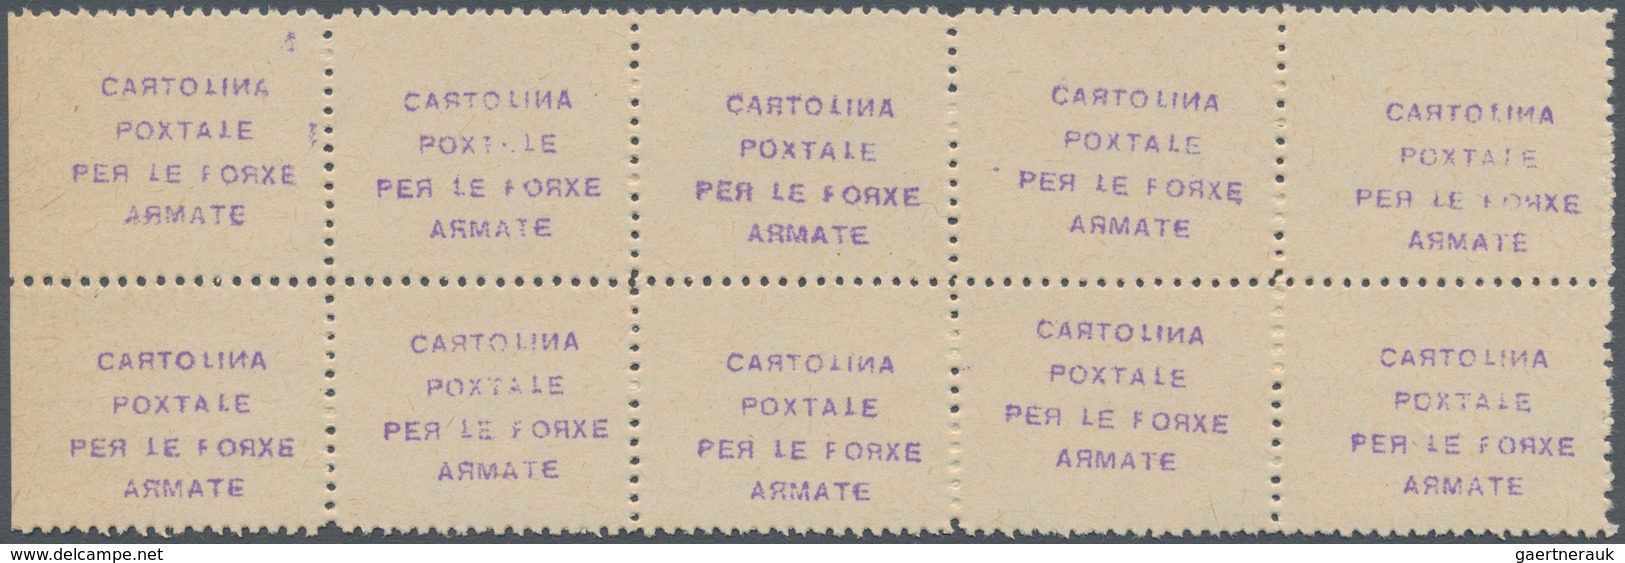 01055 Italien - Besonderheiten: 1941, Postage Free Labels For Postcards: Printed In Violet On Yellowish Pa - Ohne Zuordnung